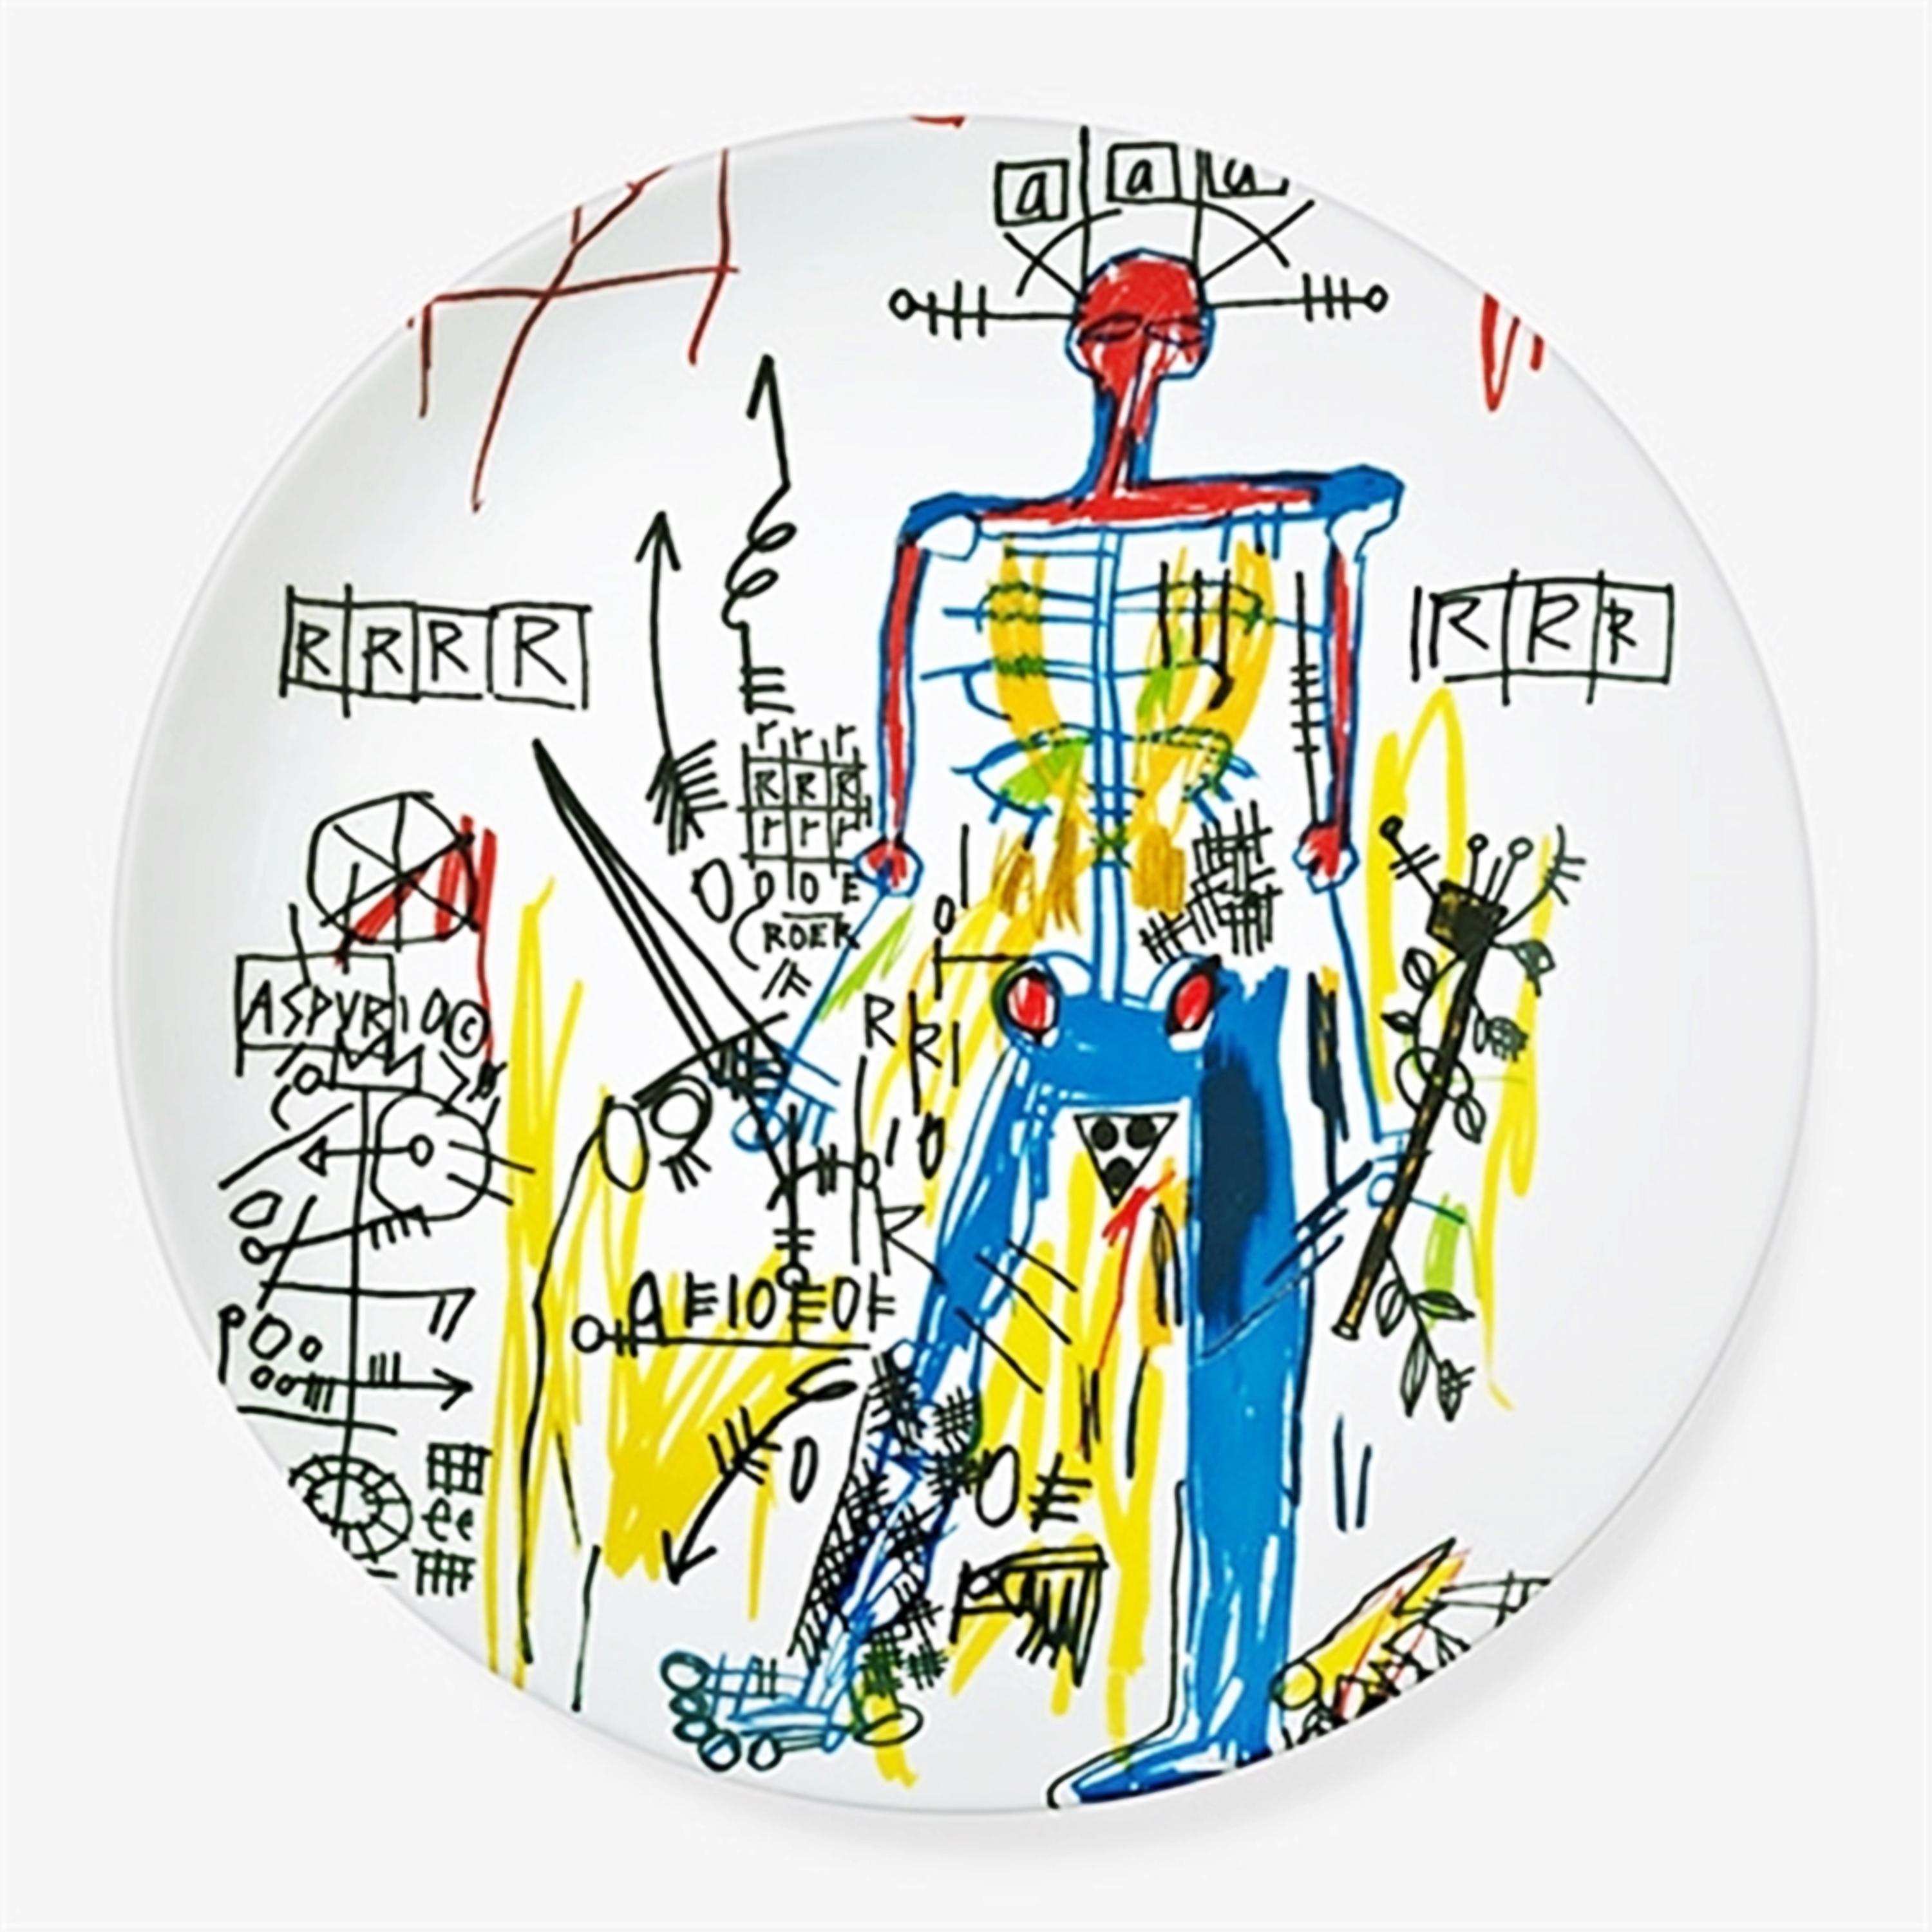 Estate Authorized Porcelain Plate in Presentation Gift Box - Mixed Media Art by Jean-Michel Basquiat